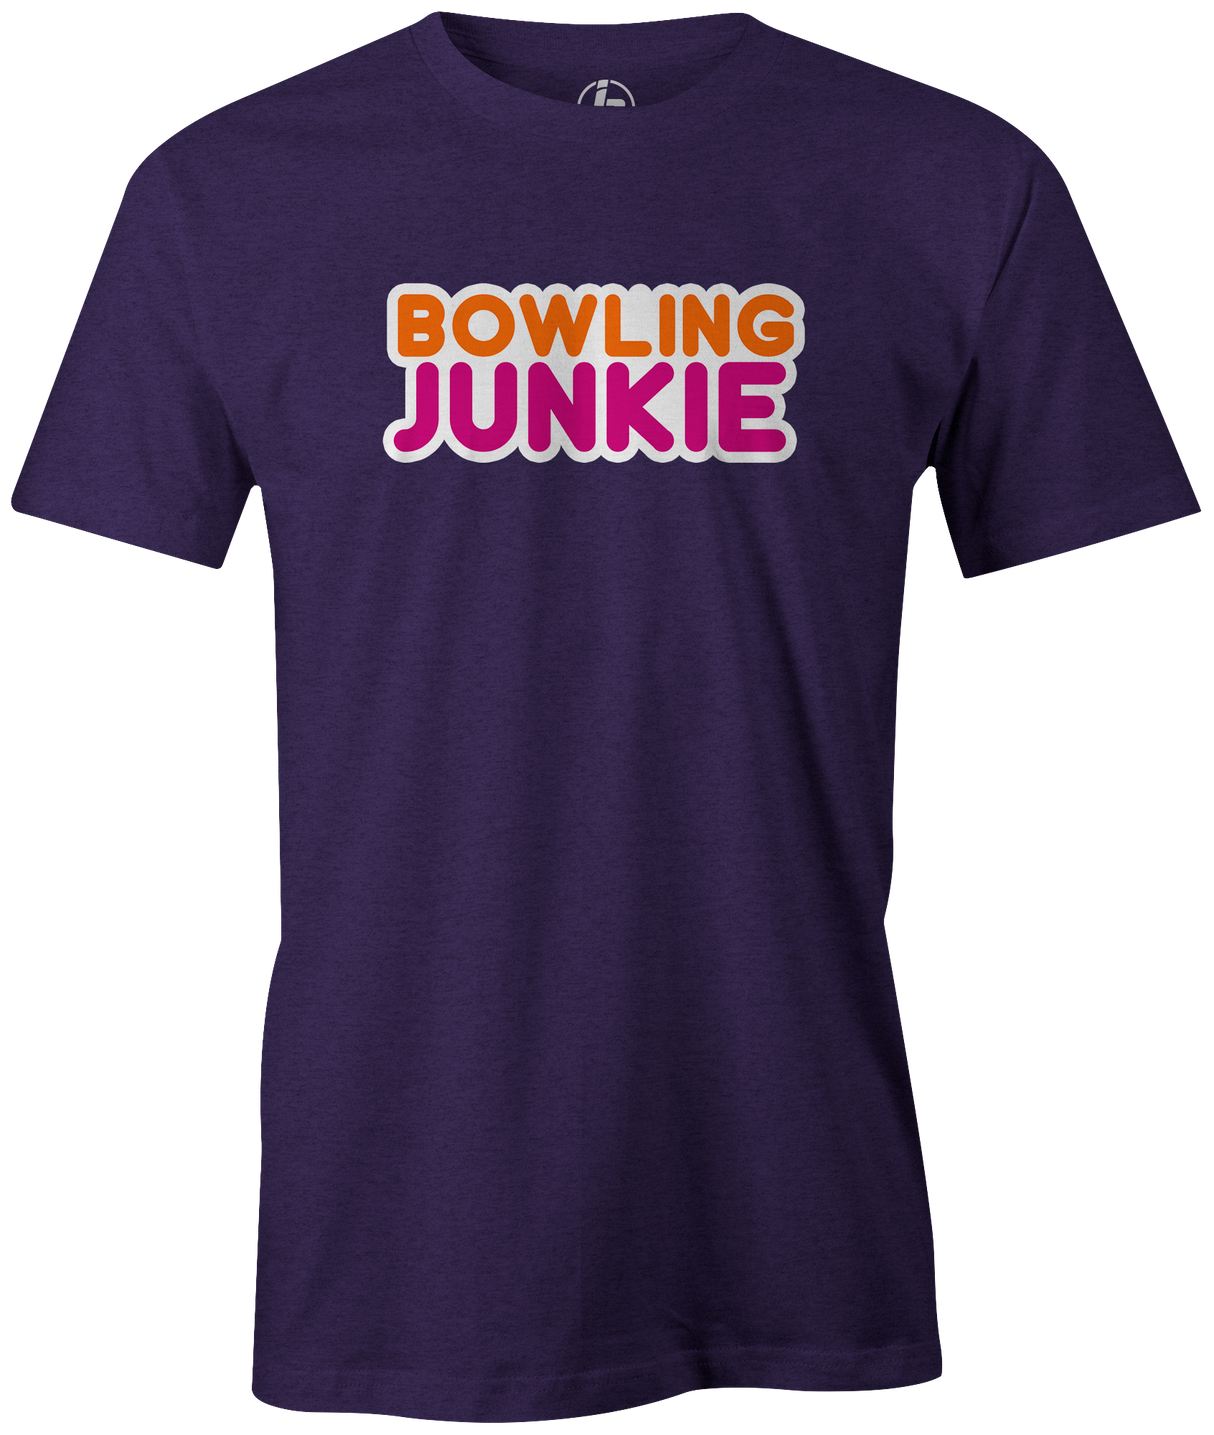 Bowling Junkie It's addicting and you don't care who knows you love bowling! Dunkin Donuts and coffee Gather up your friends, snag this cool t-shirt and hit the lanes for a fun night out! This shirt is also the perfect gift for anyone who loves to bowl! League bowling tshirt, Team shirt, T-shirt, tee-shirt, tshirt. Novelty. Funny t-shirt. PUrple